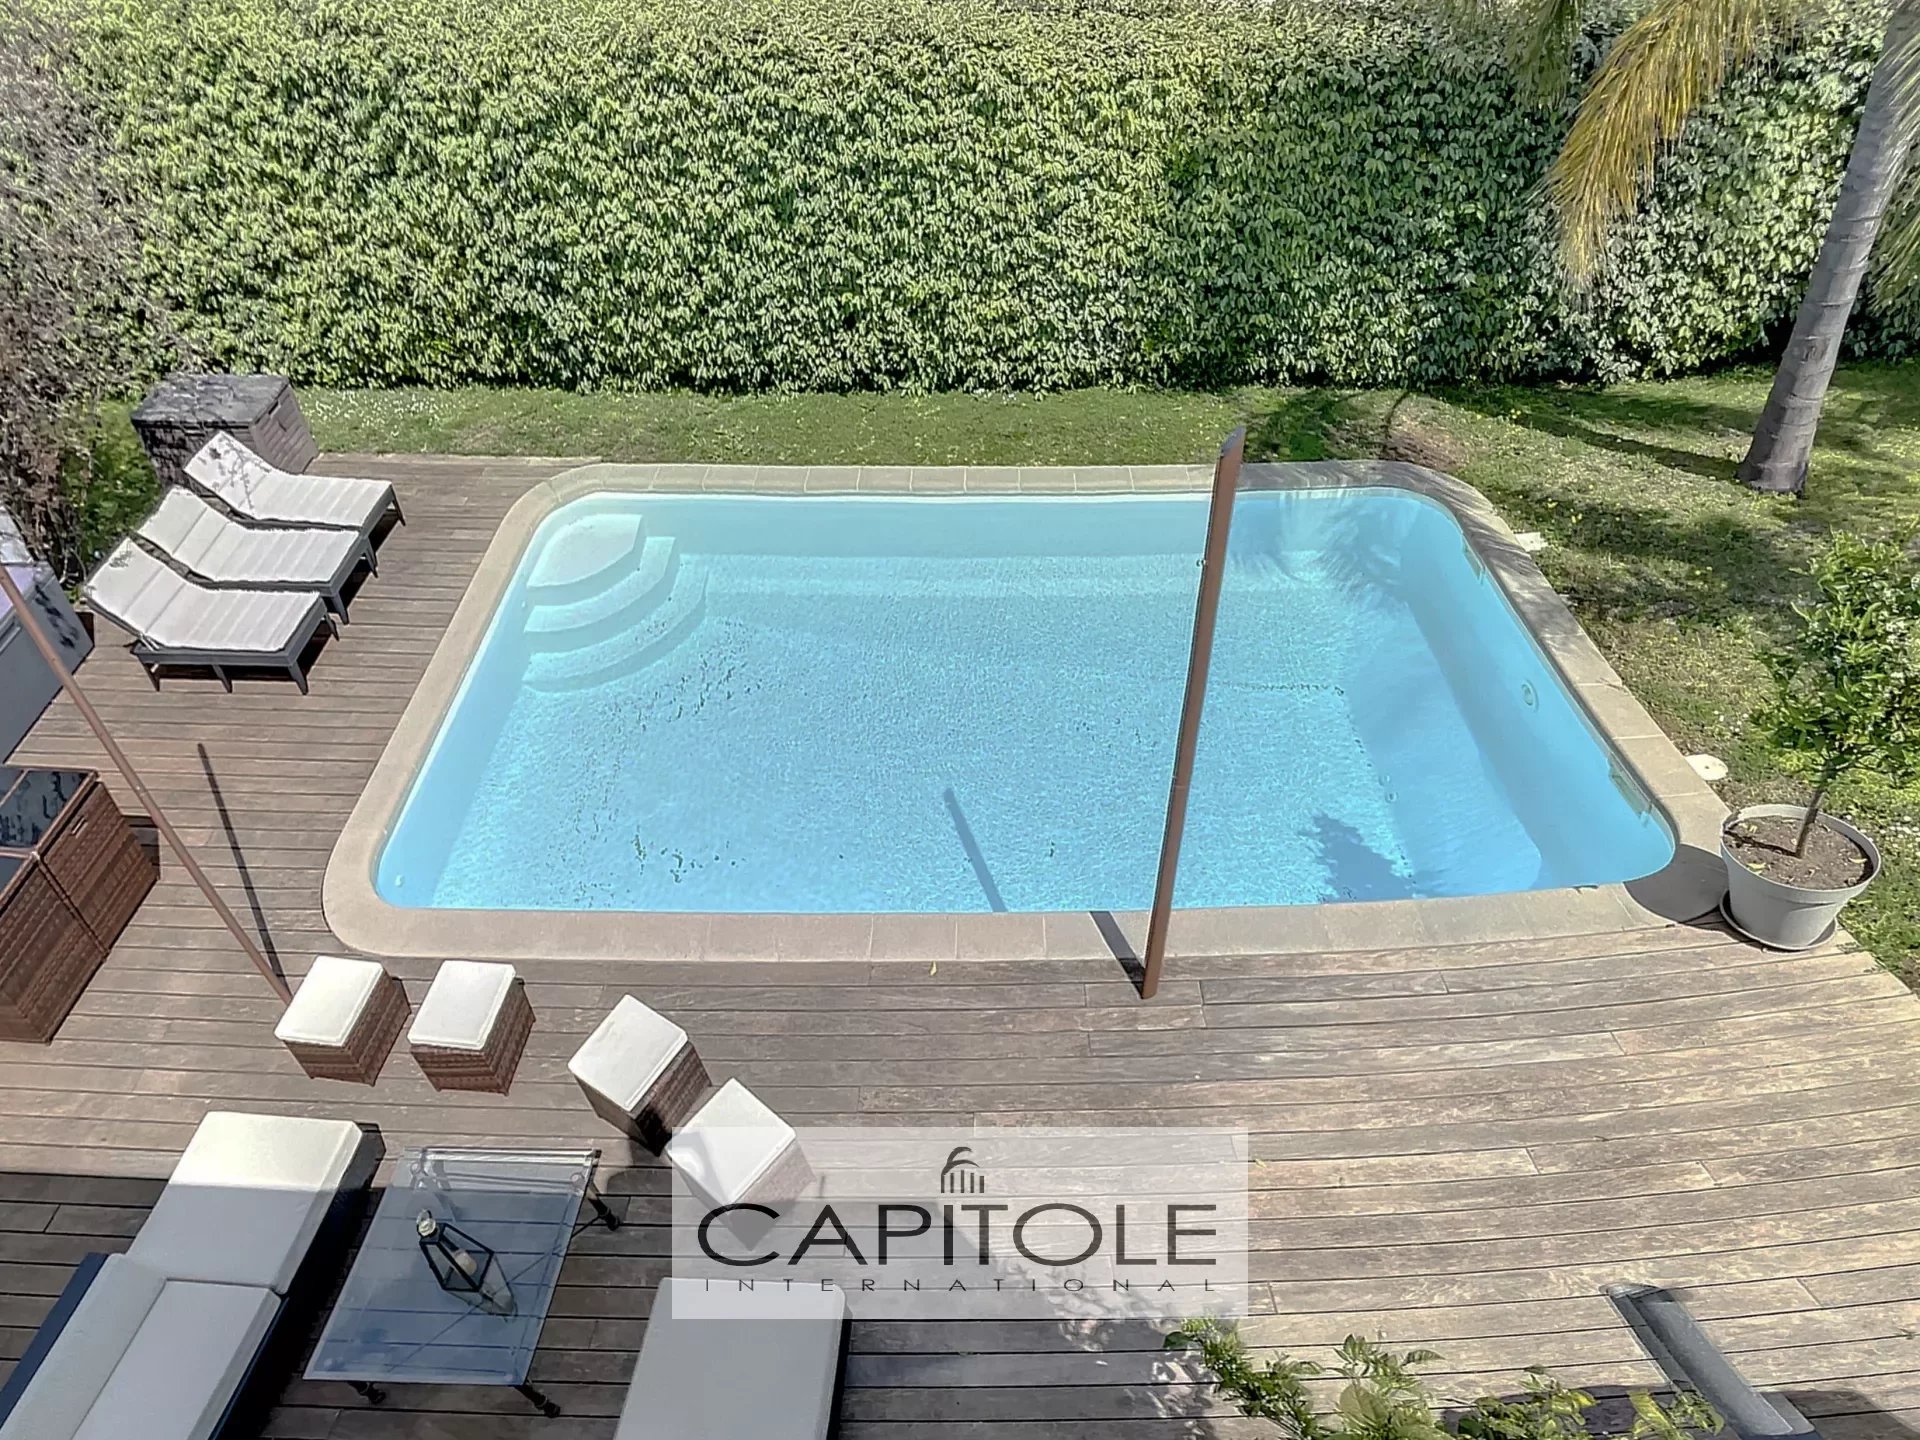 ANTIBES- For sale - 3 bedrooms contempary villa  with pool, close to  the beach , calm area